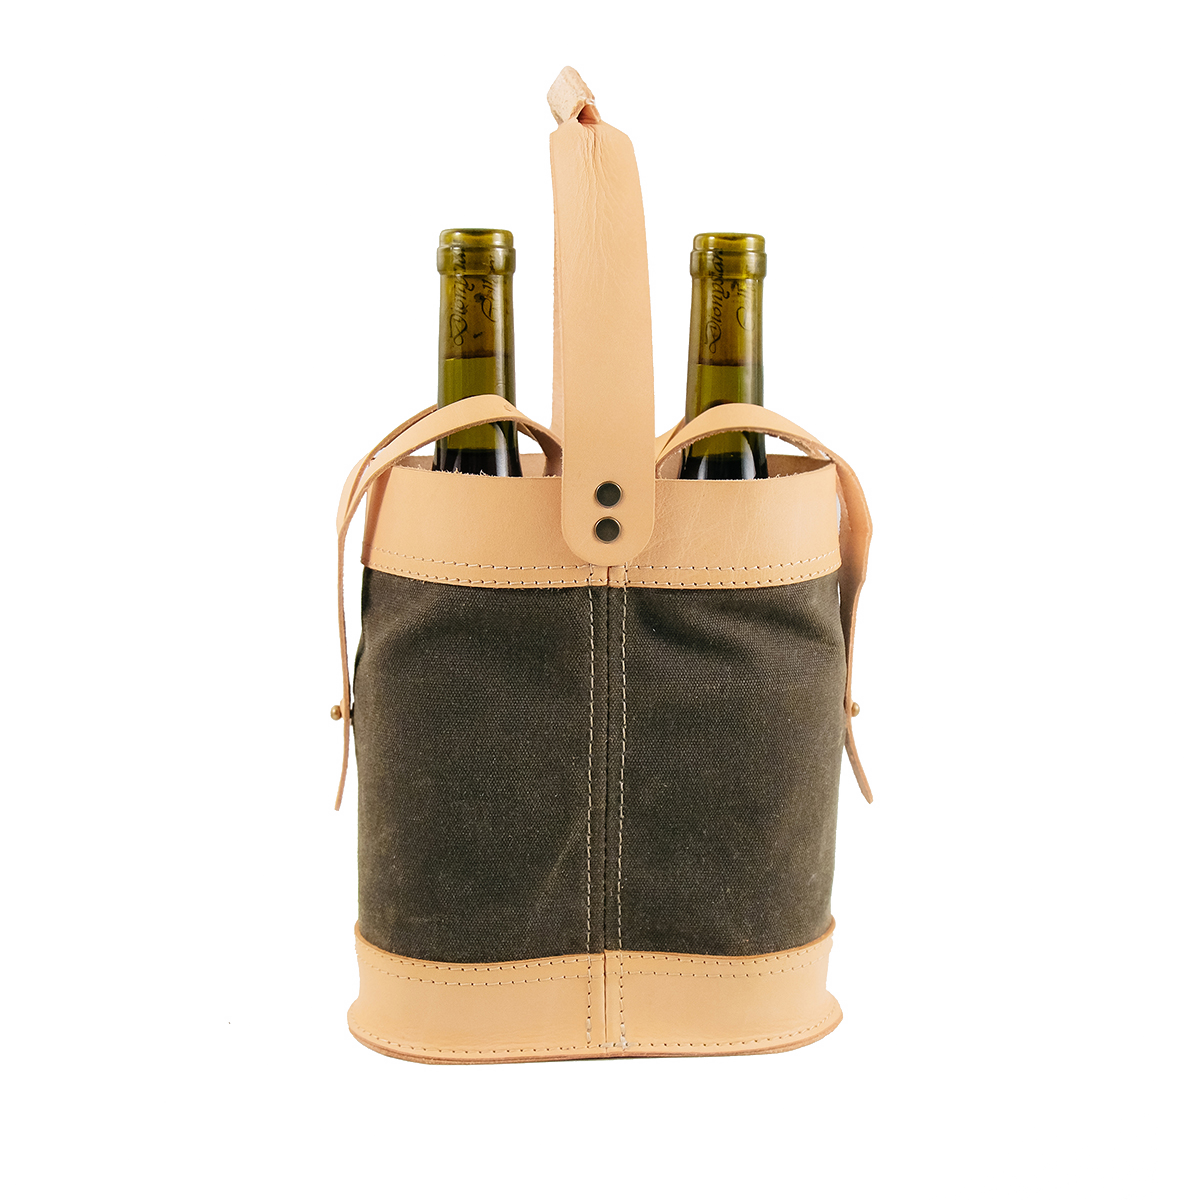 Rustico HS0008-0002 Napa Leather Double Wine Tote in Saddle